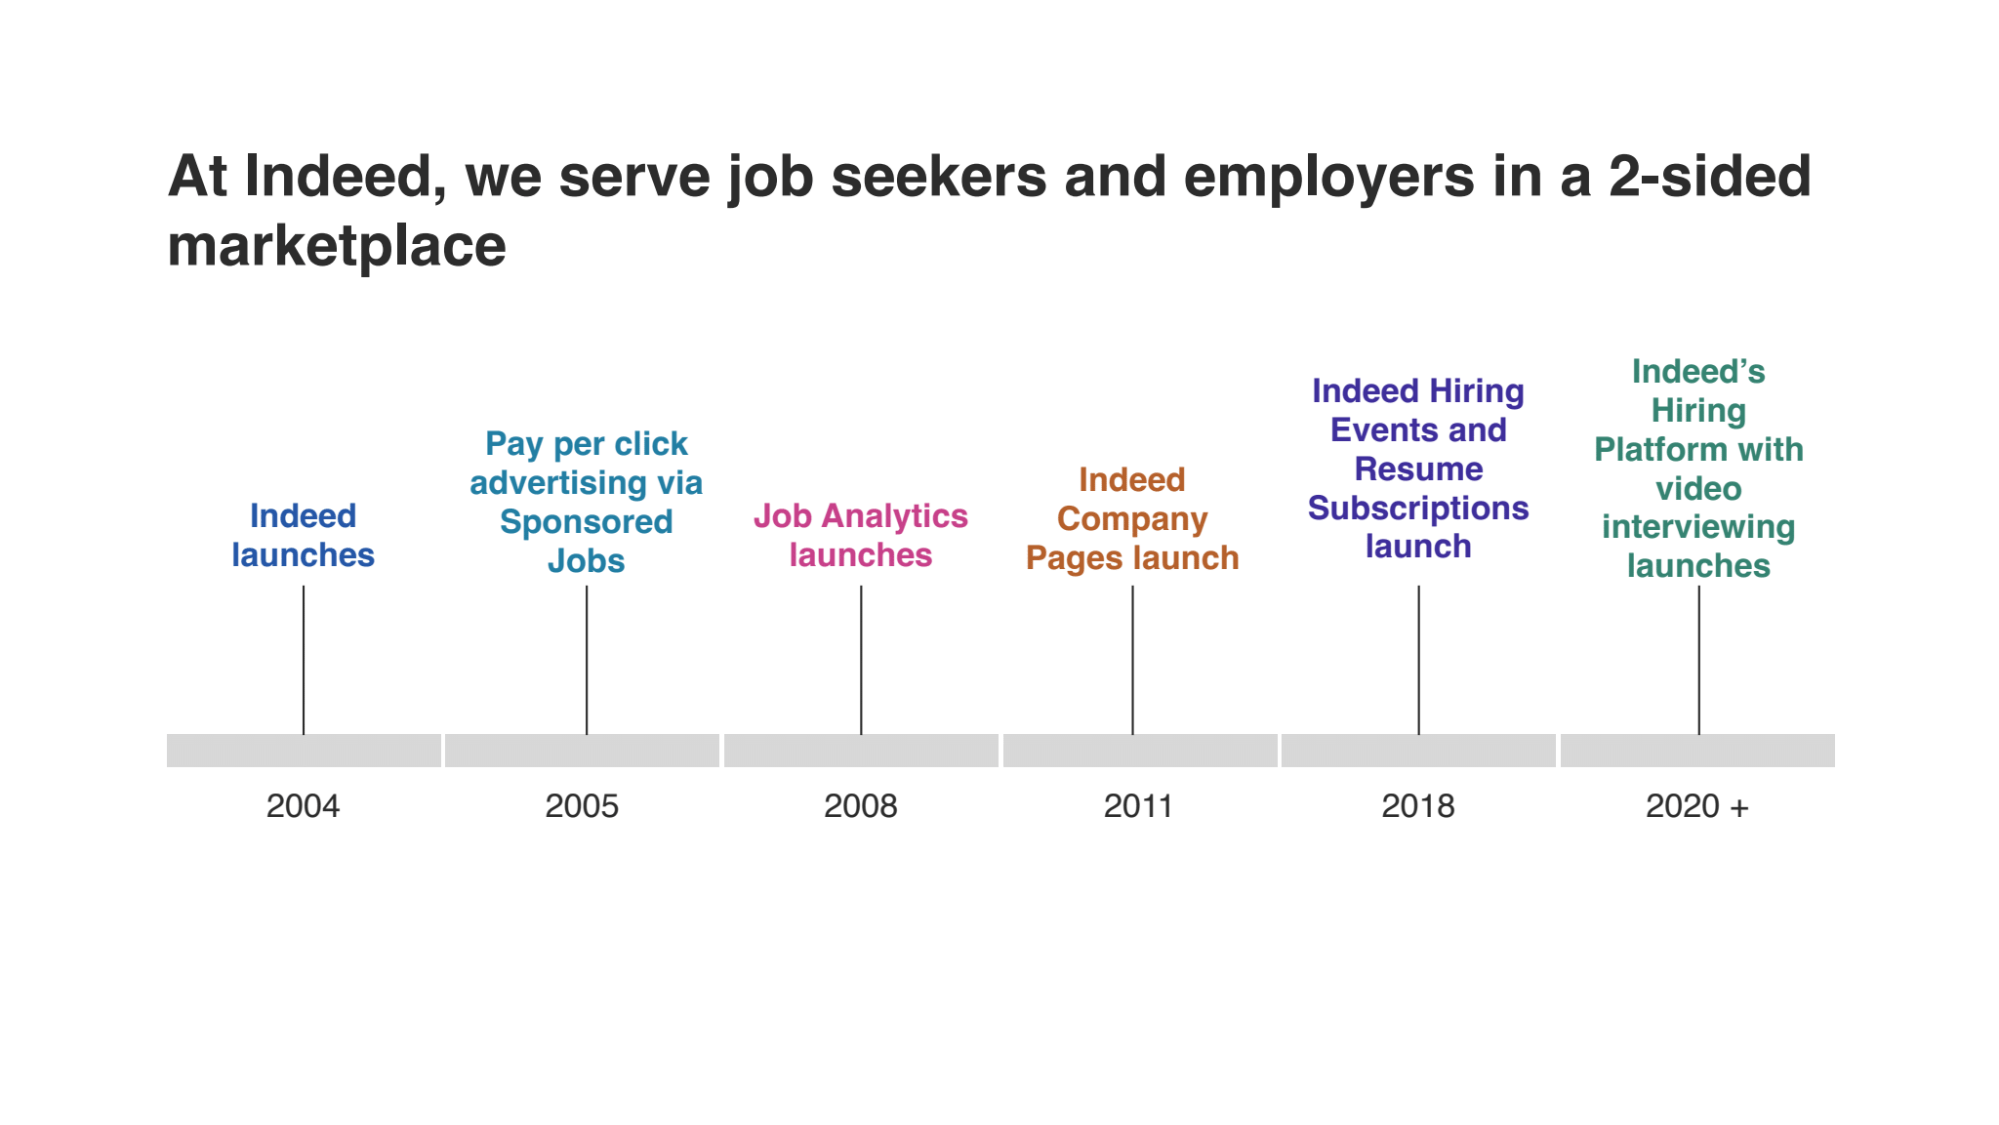 At Indeed, we serve job seekers and employers in a two-sided marketplace